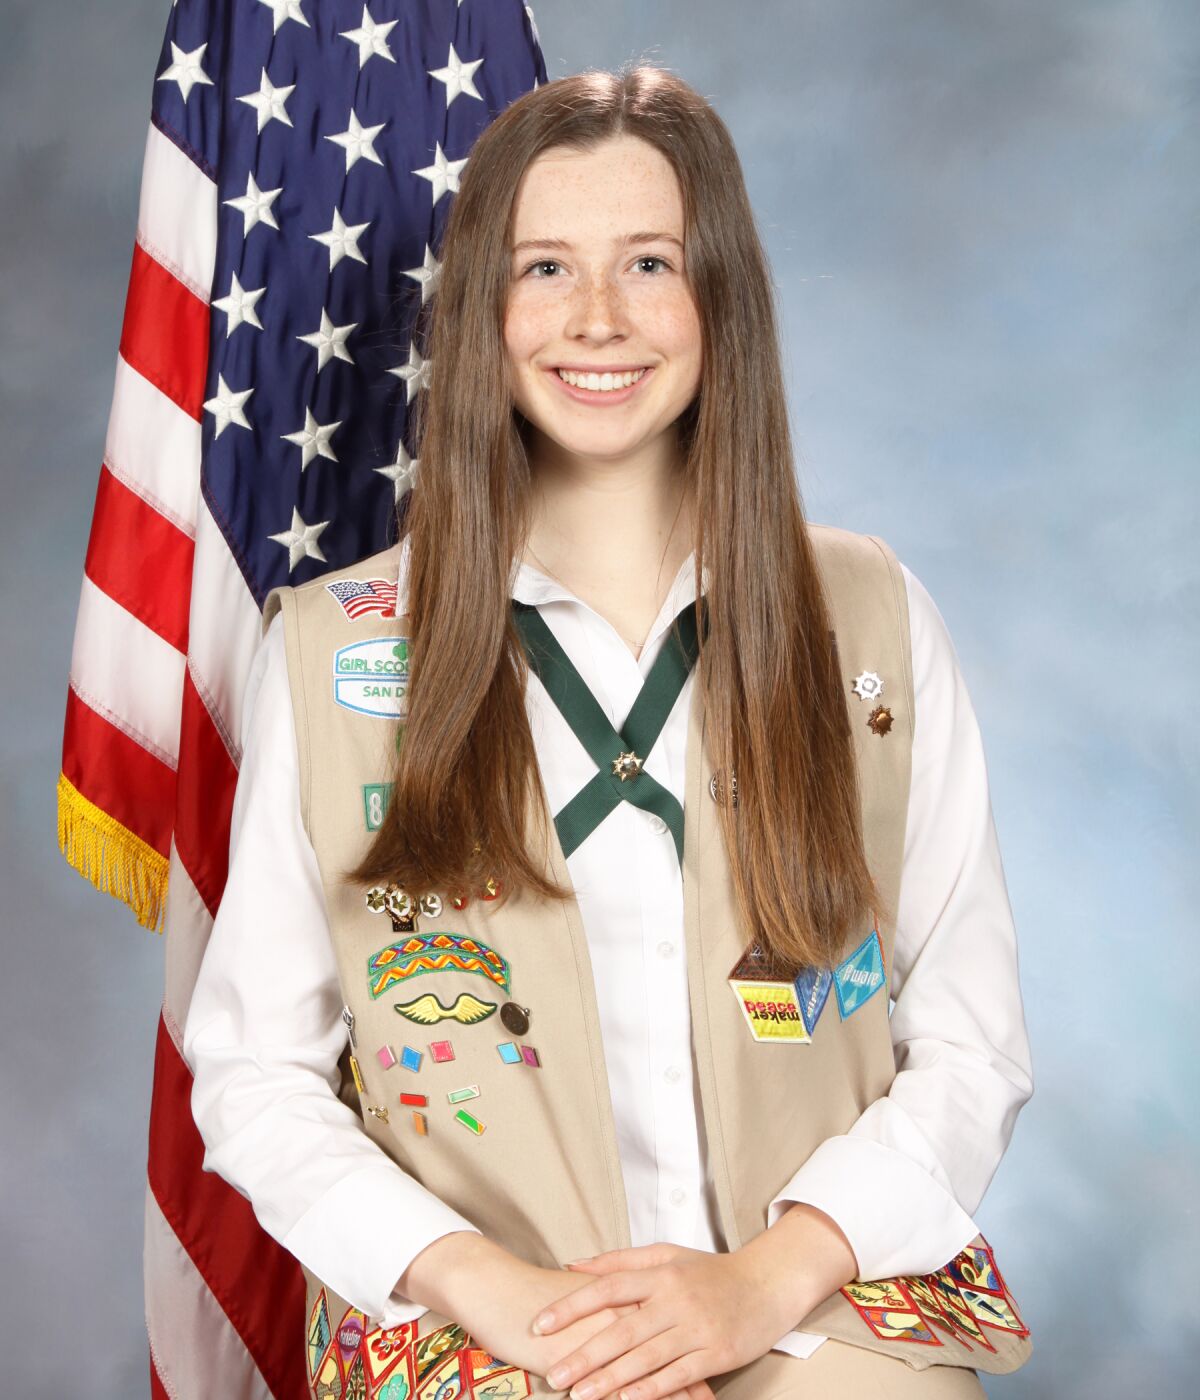 Heather Lyons is one of four Girl Scouts in 4S Ranch and Rancho Bernardo to receive the Gold Award. 